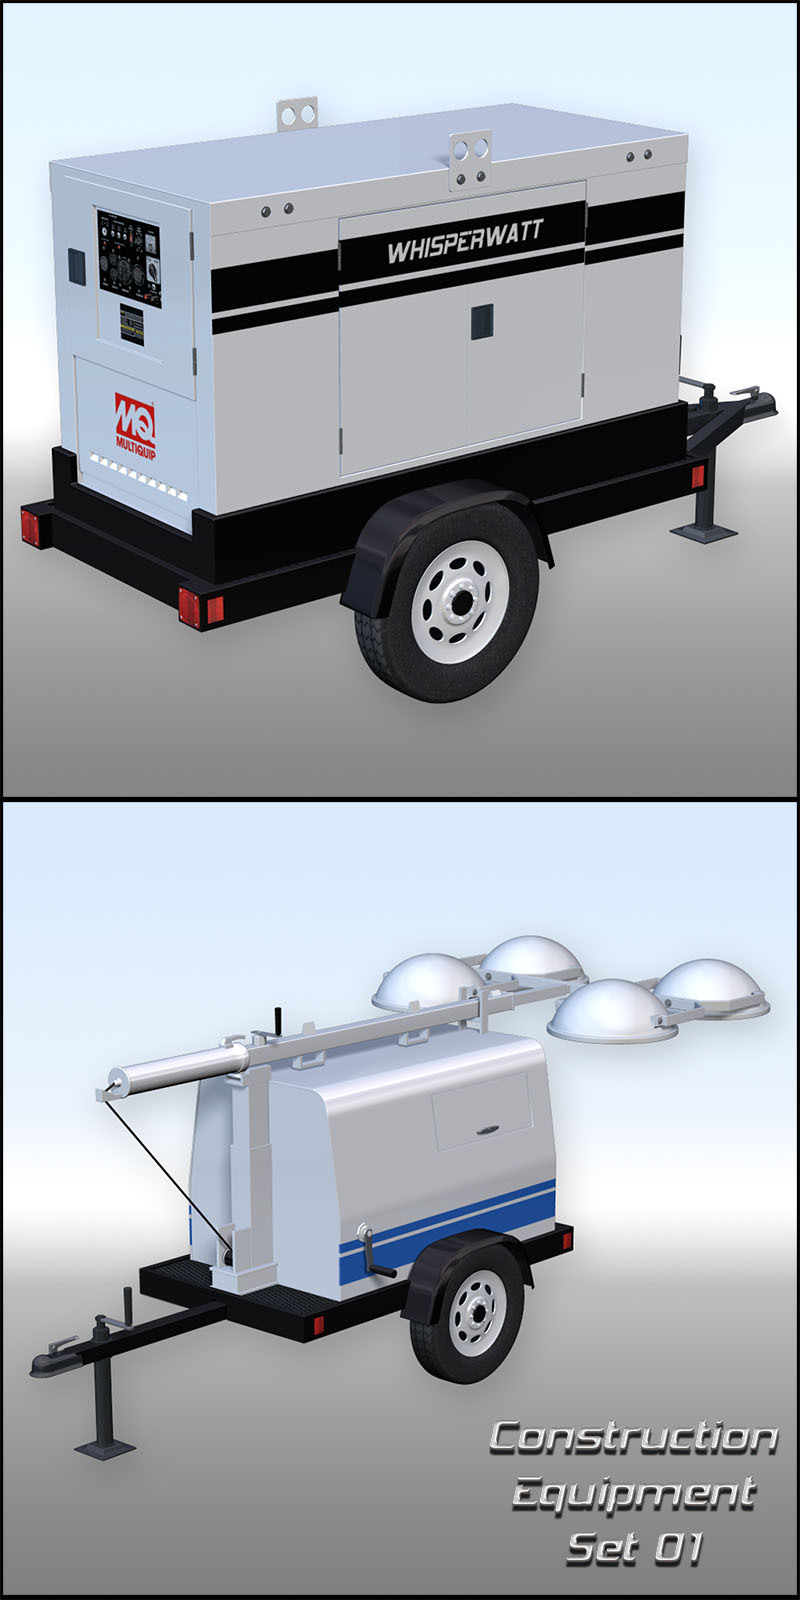 Poser  models of a mobile generator and mobile lighting unit commonly found on  construction